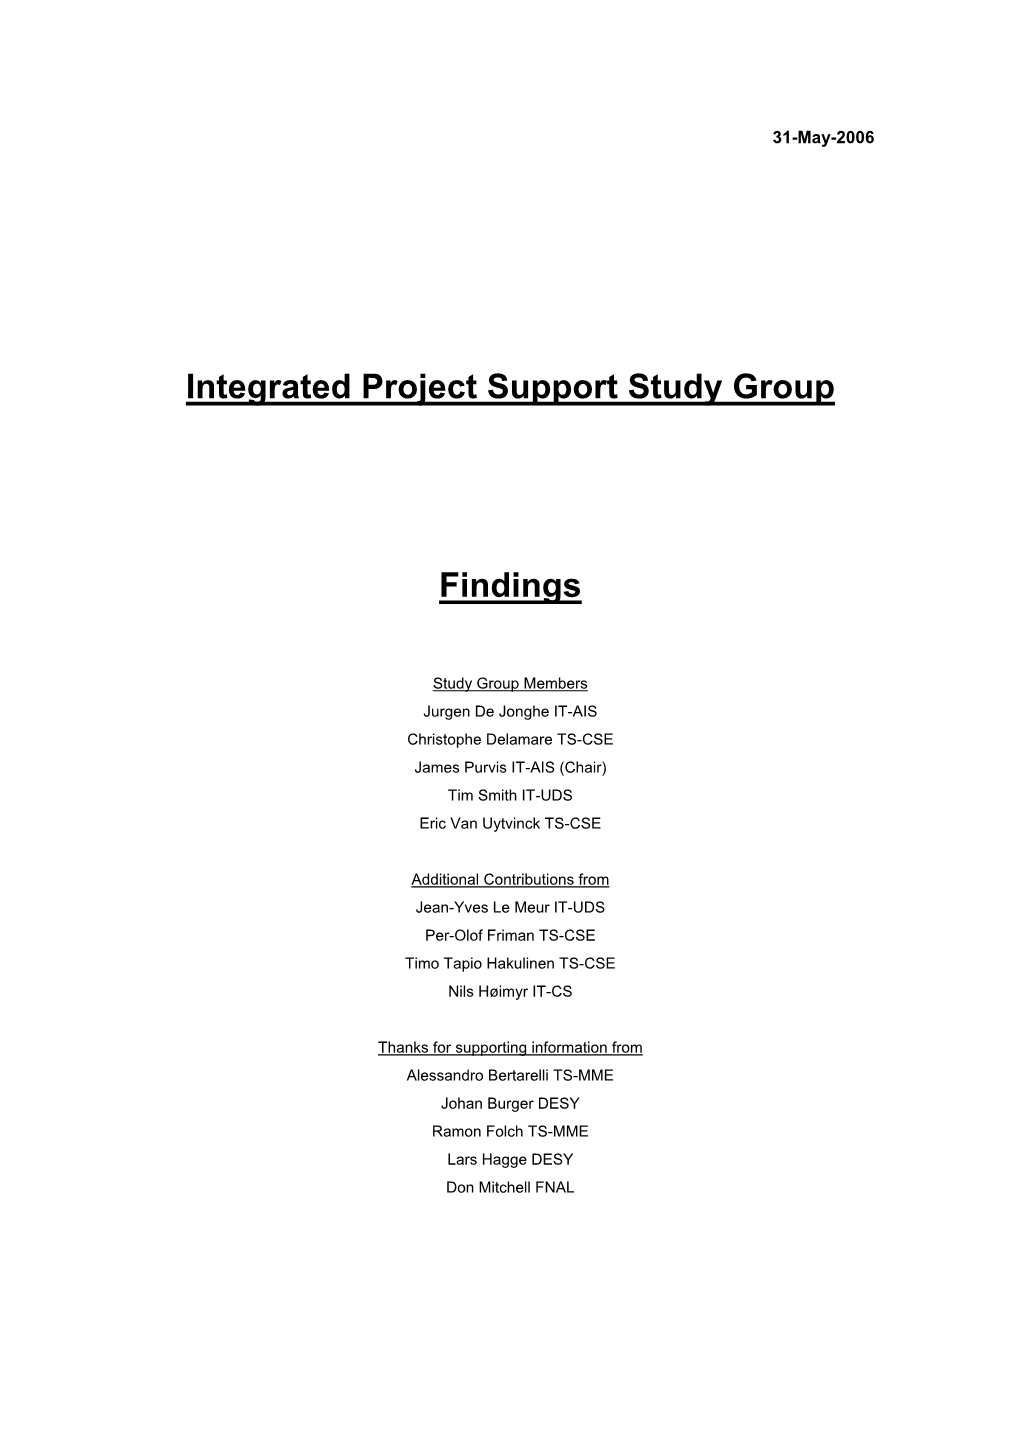 Integrated Project Support Study Group Findings 31-May-2006